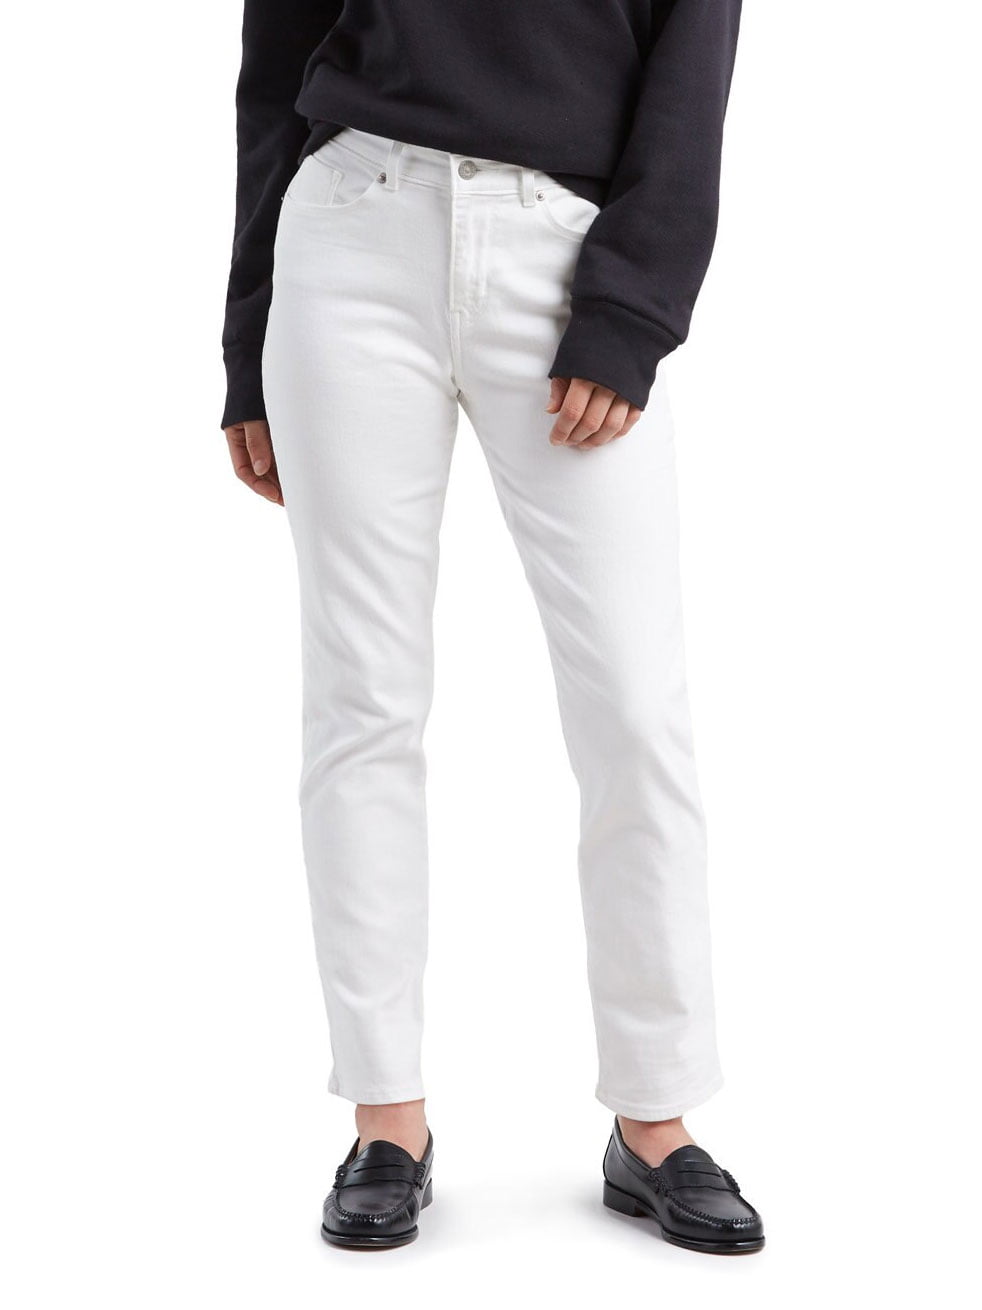 white straight cut jeans